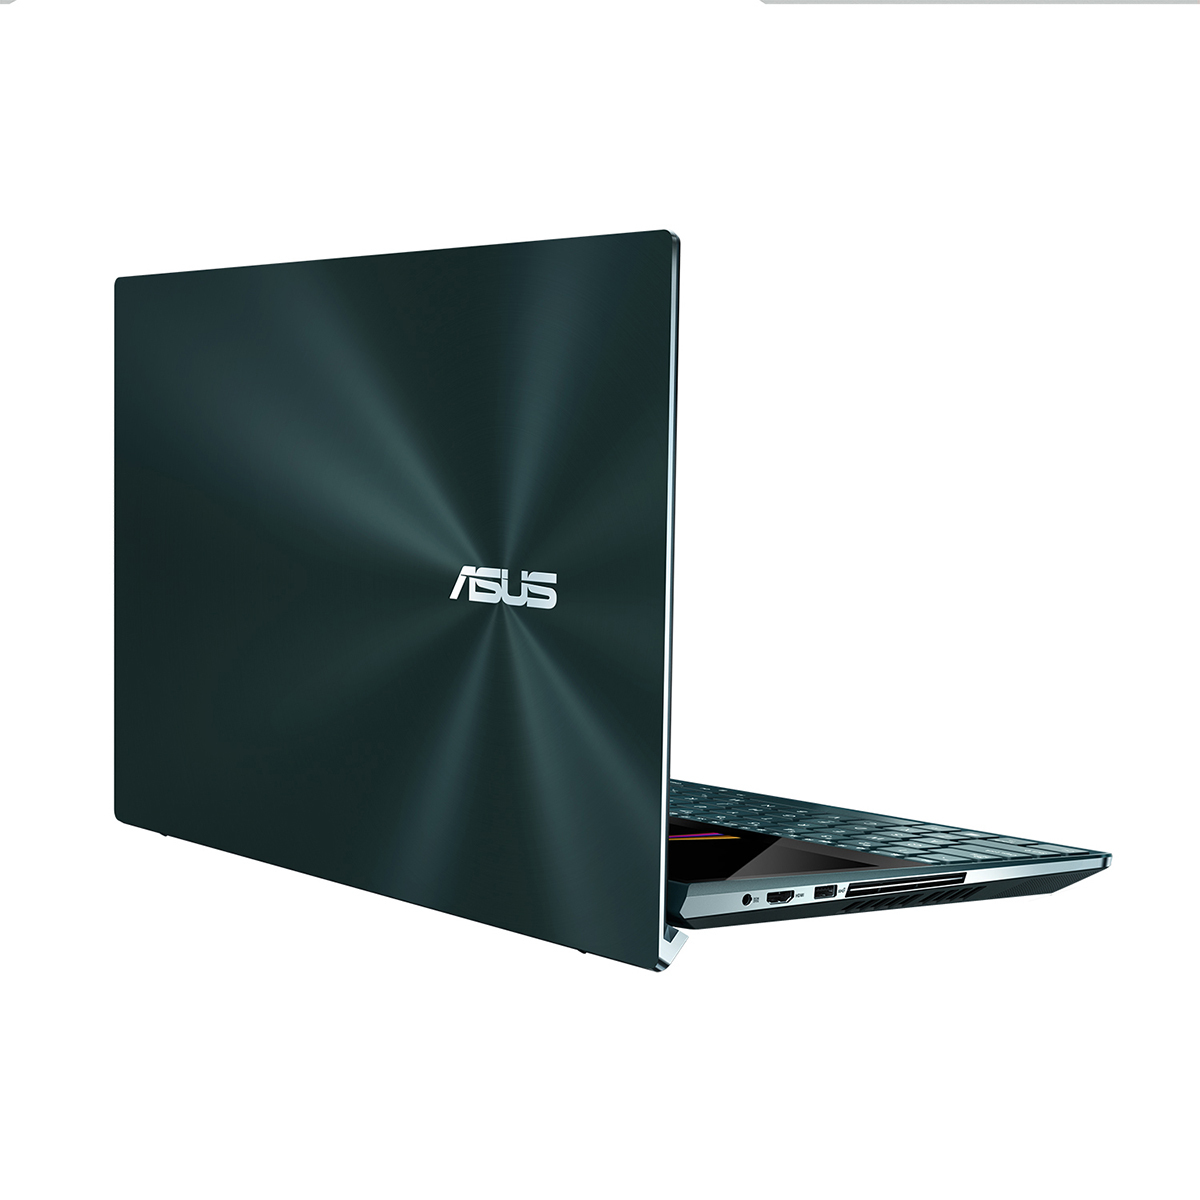 Buy ASUS ZenBook Pro Duo, Intel Core i9, 32GB RAM, 1TB SSD, NVIDIA GeForce RTX 2060, 15.6  Inch OLED Laptop, UX581LV-H2024T at costco.co.uk